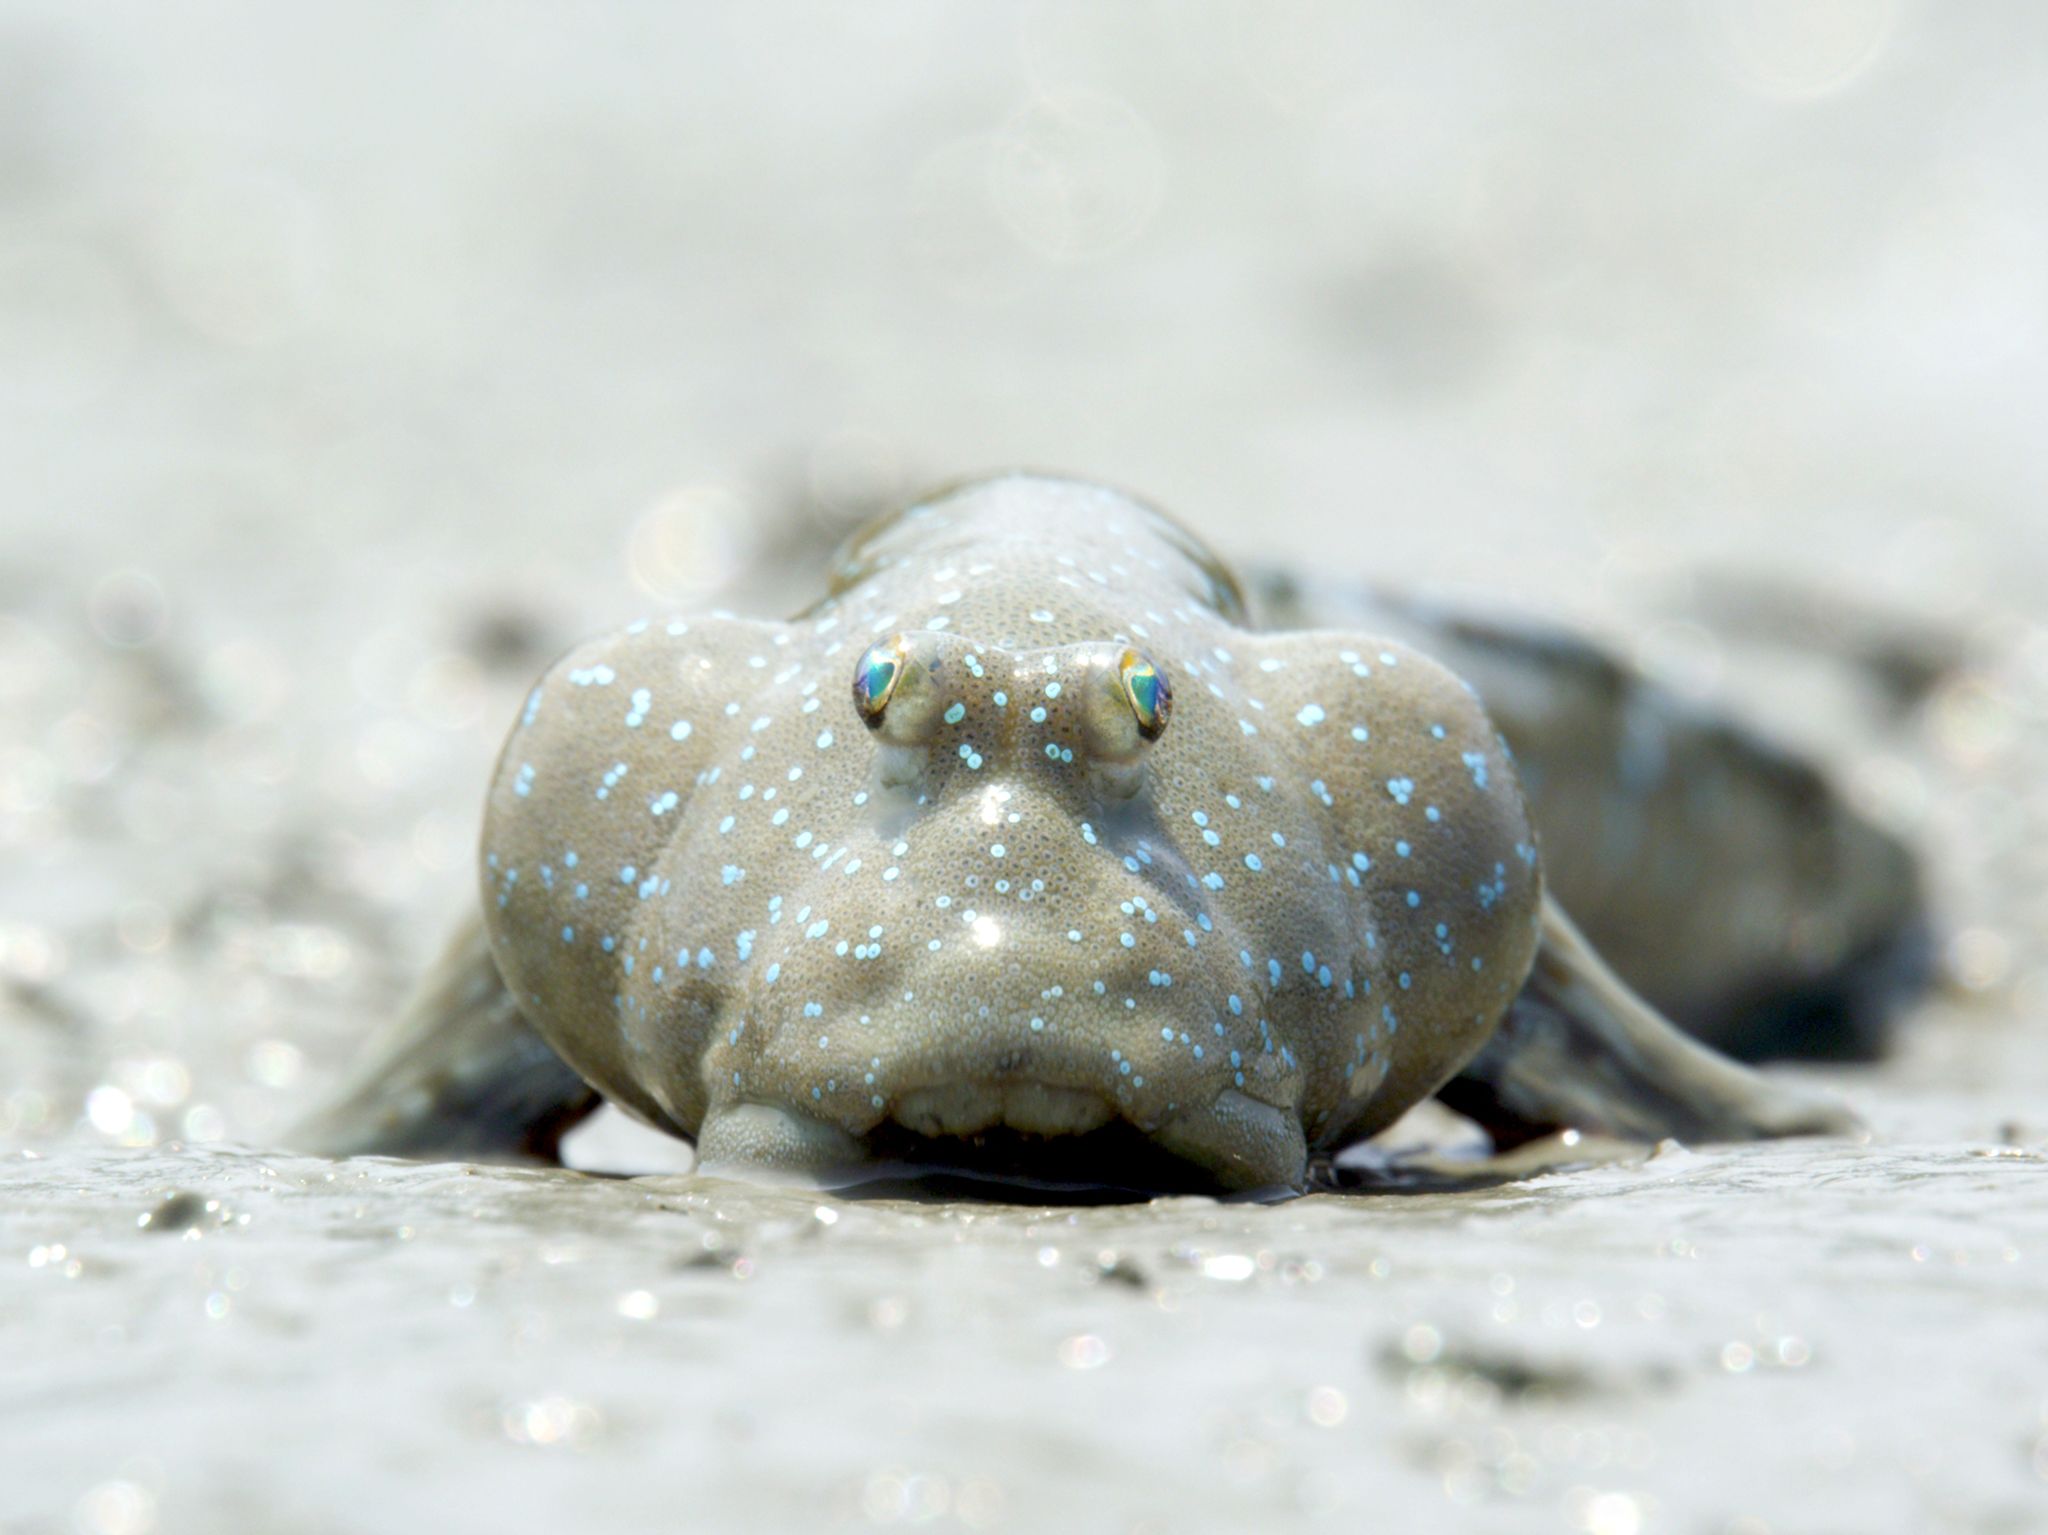 Korea:  Bluespotted mudskipper at the Suncheon Bay.  This image is from Wild Korea. [Photo of the day - January 2019]